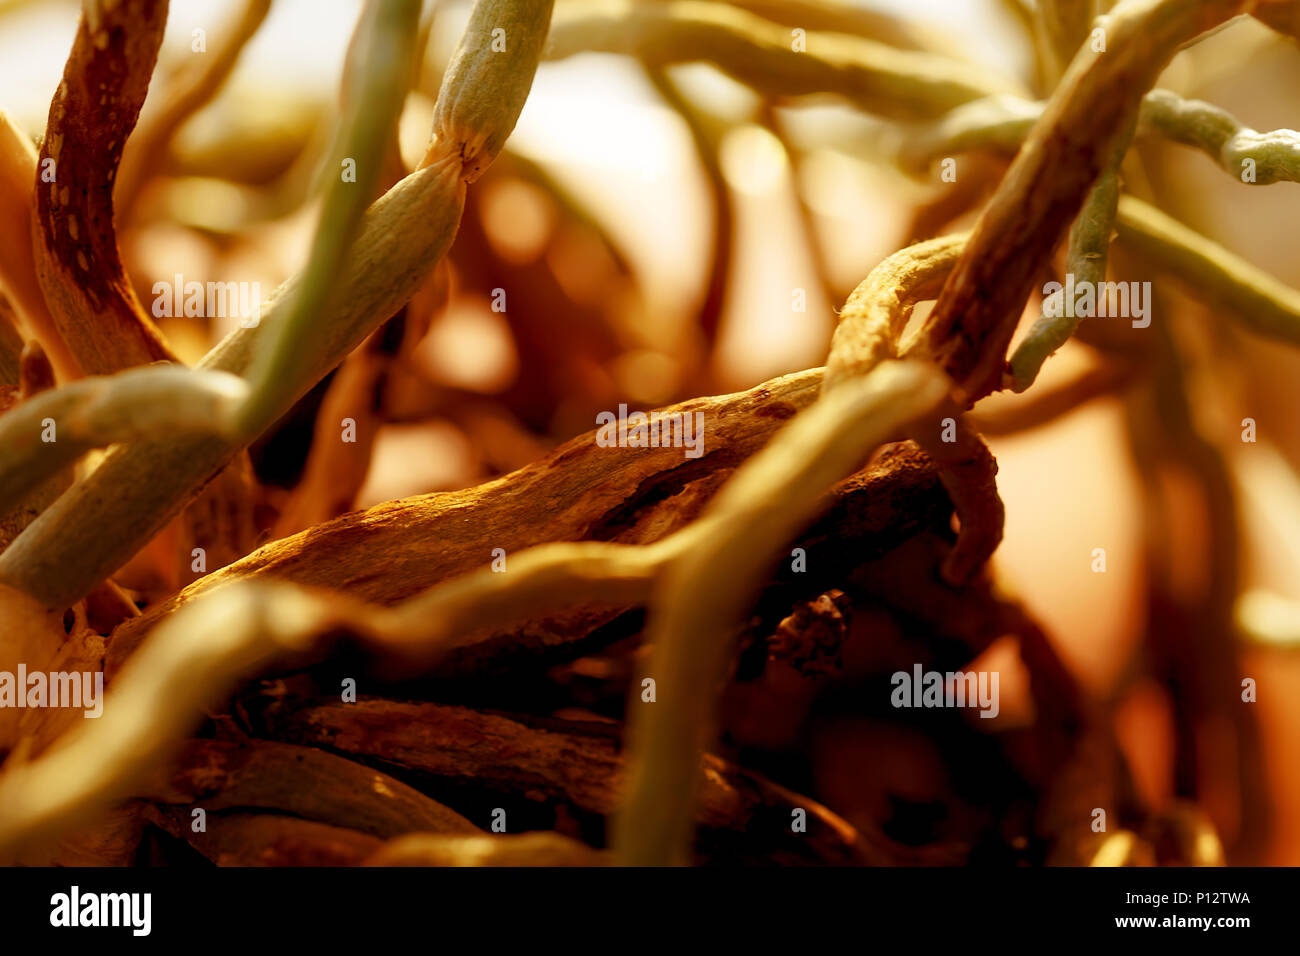 Tangled roots of orchids. Blur background. Stock Photo